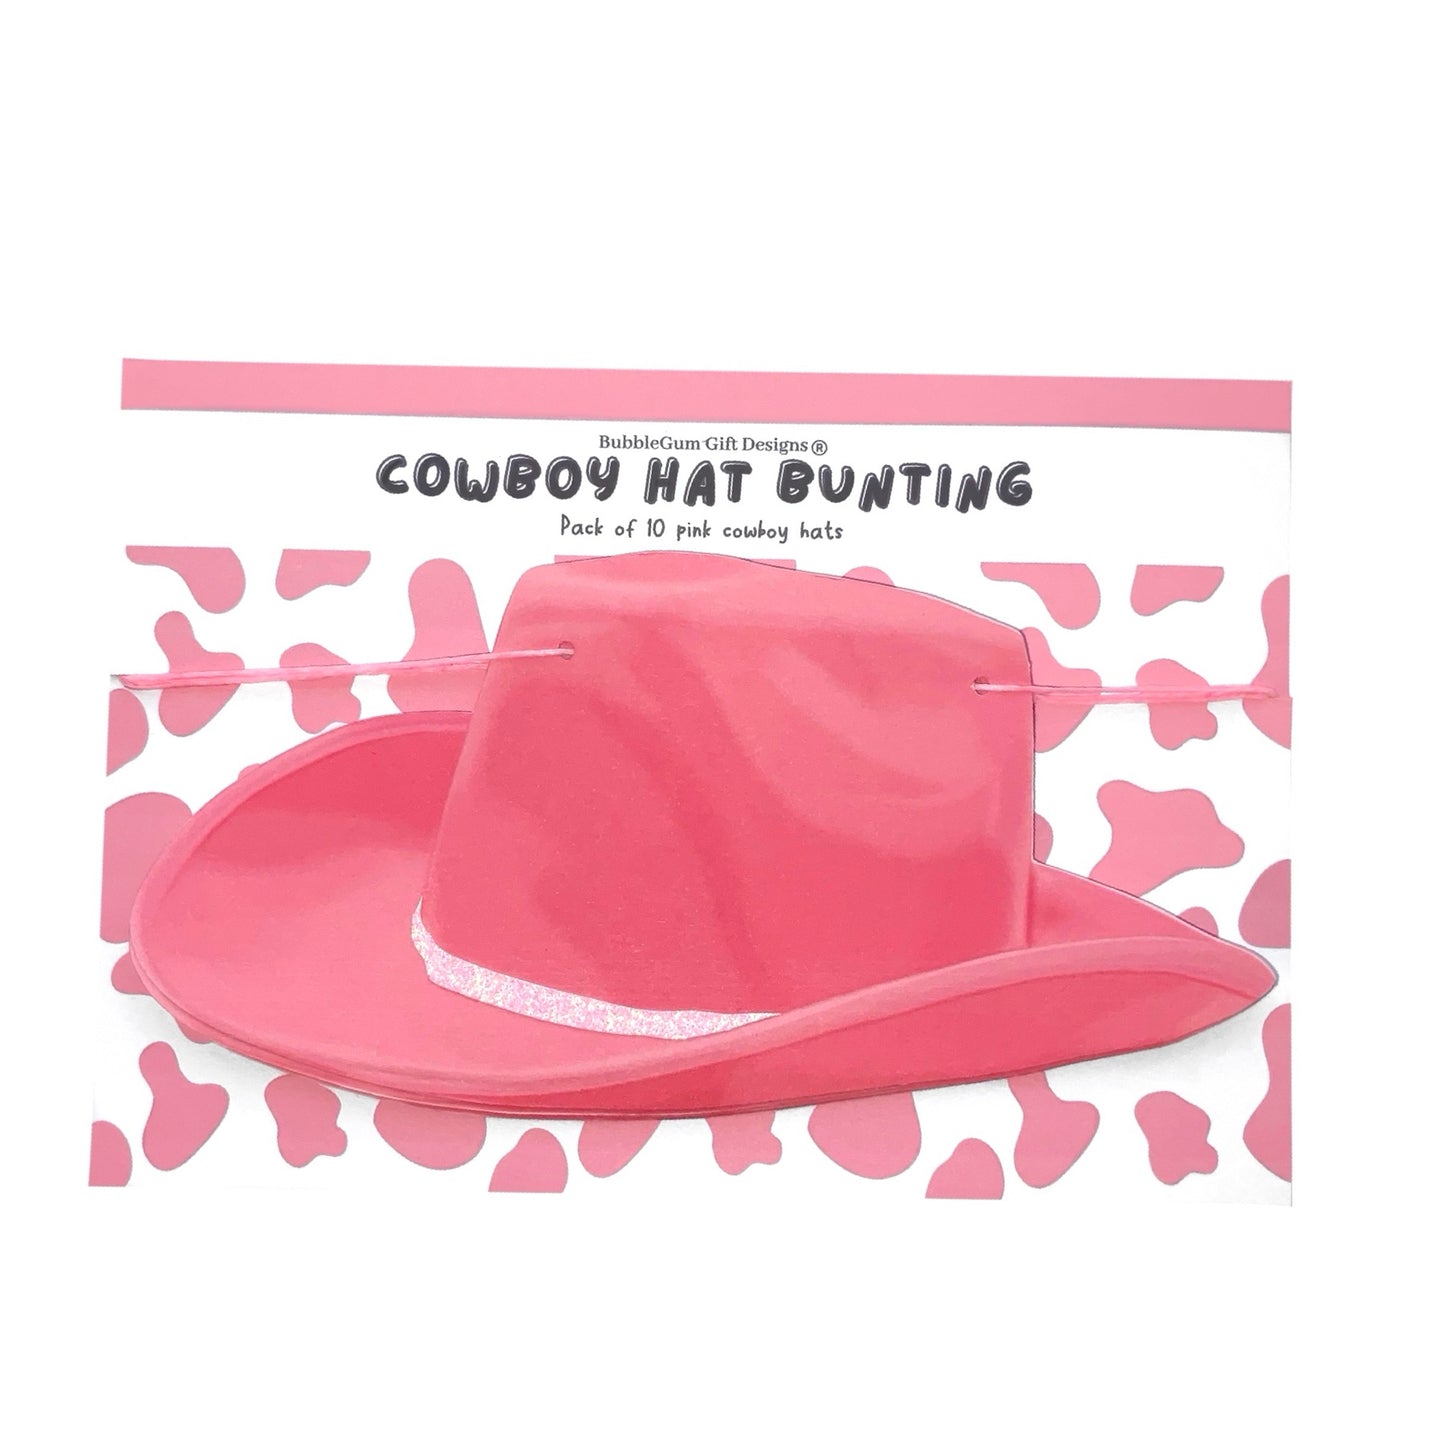 Pink cowgirl hat bunting banner, Rodeo bachelorette decorations with pink glitter or cow print hat band, Hand drawn